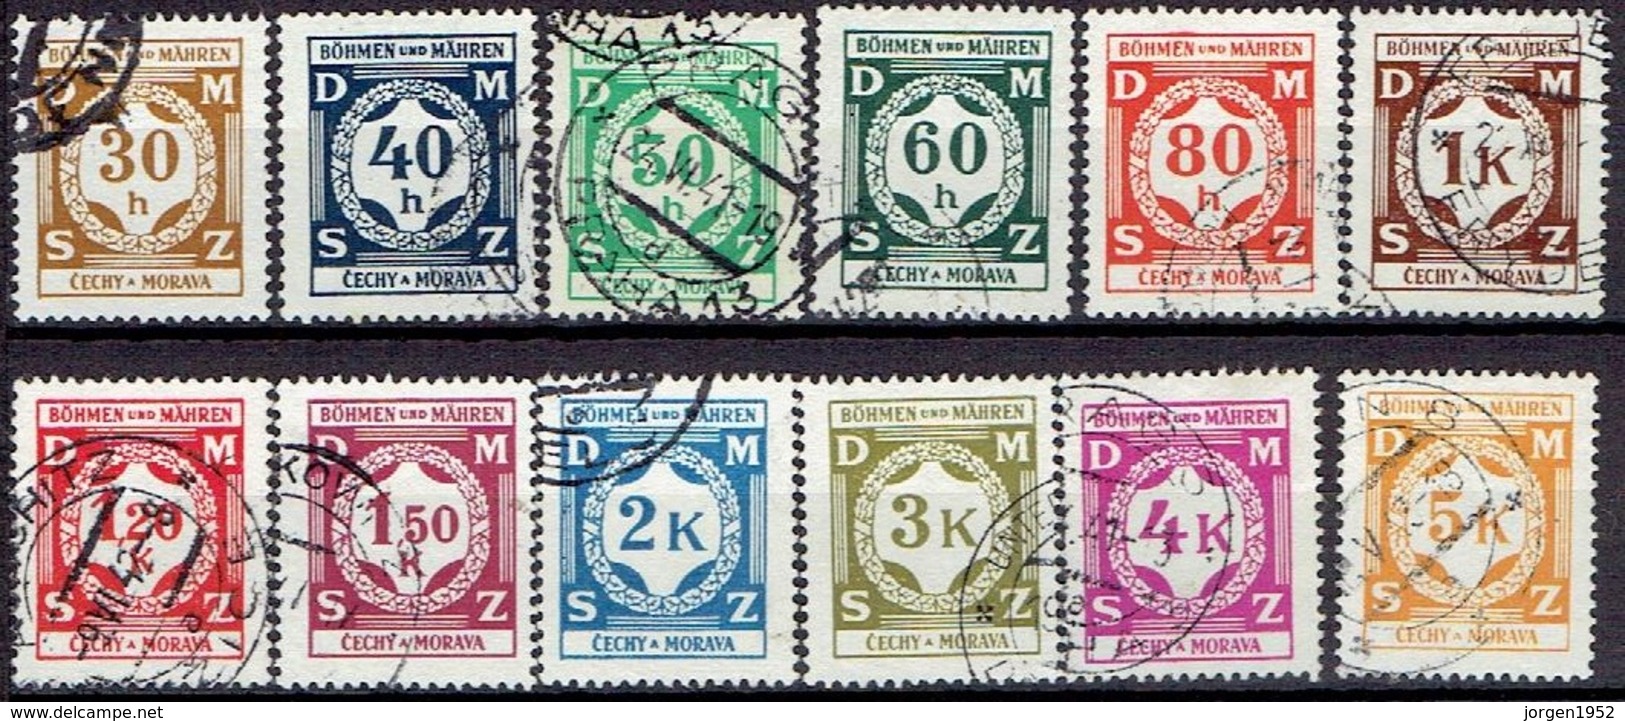 BOHEMIA & MORAVIA # POSTAGE DUE  FROM 1941 - Unused Stamps